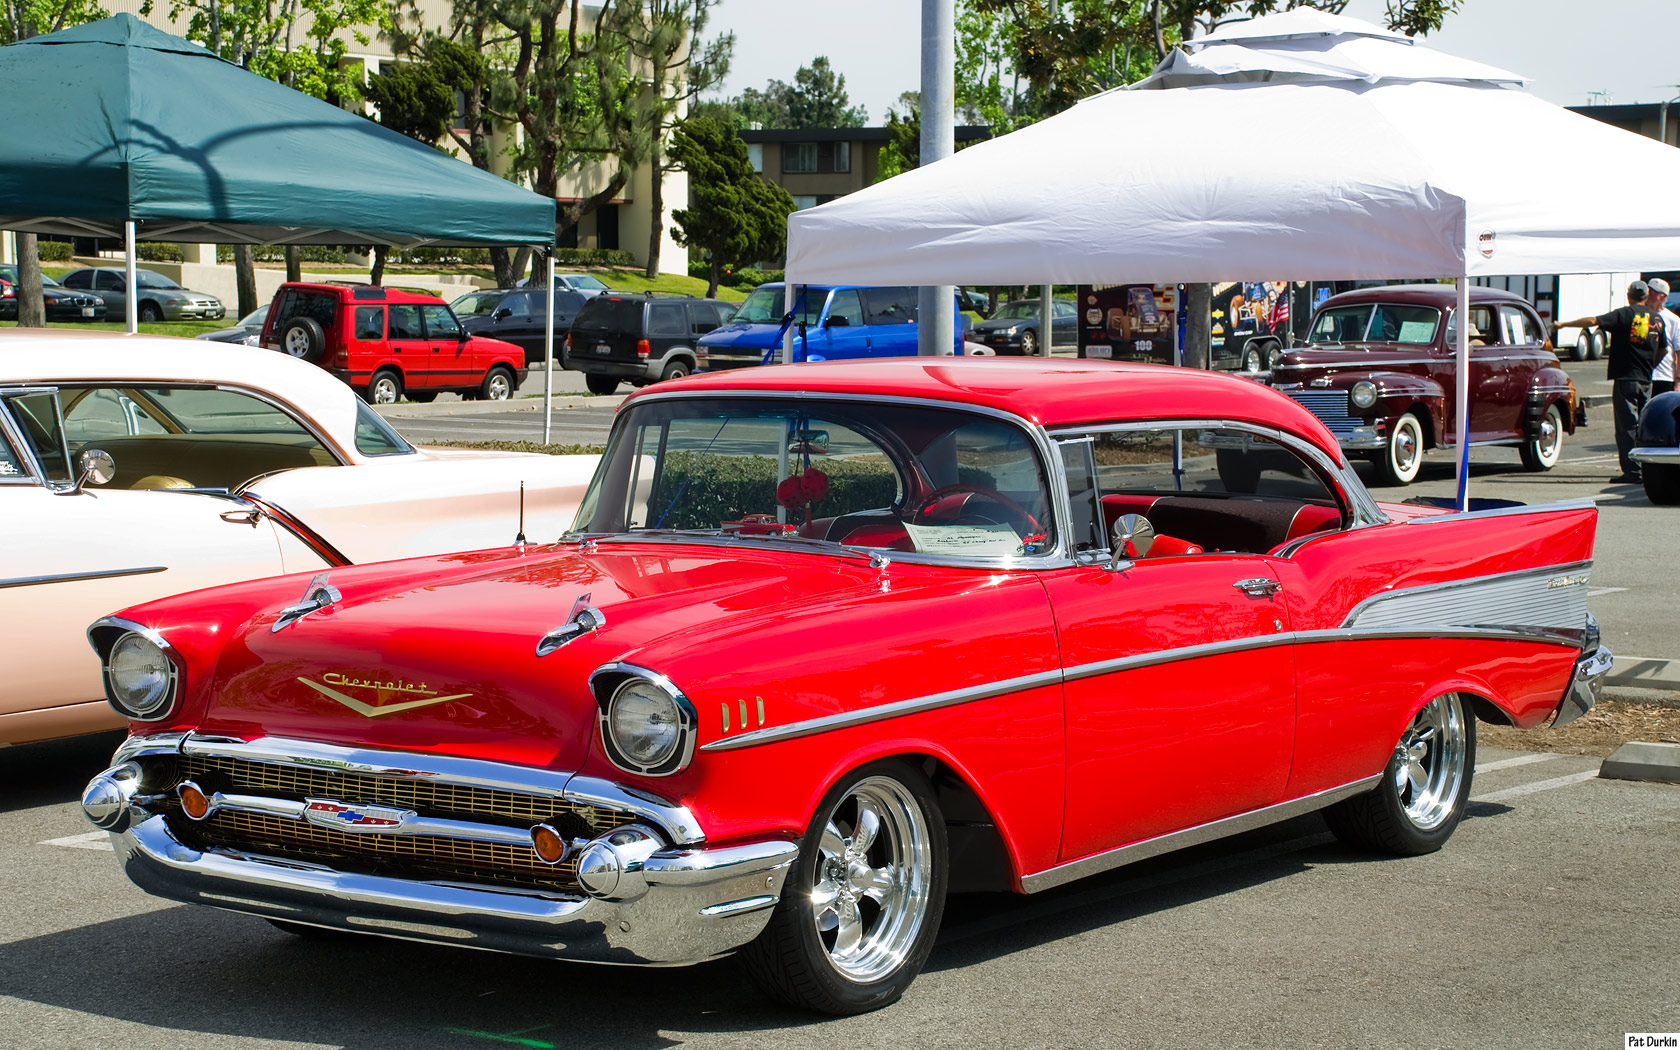 Chevrolet Bel Air Backgrounds on Wallpapers Vista